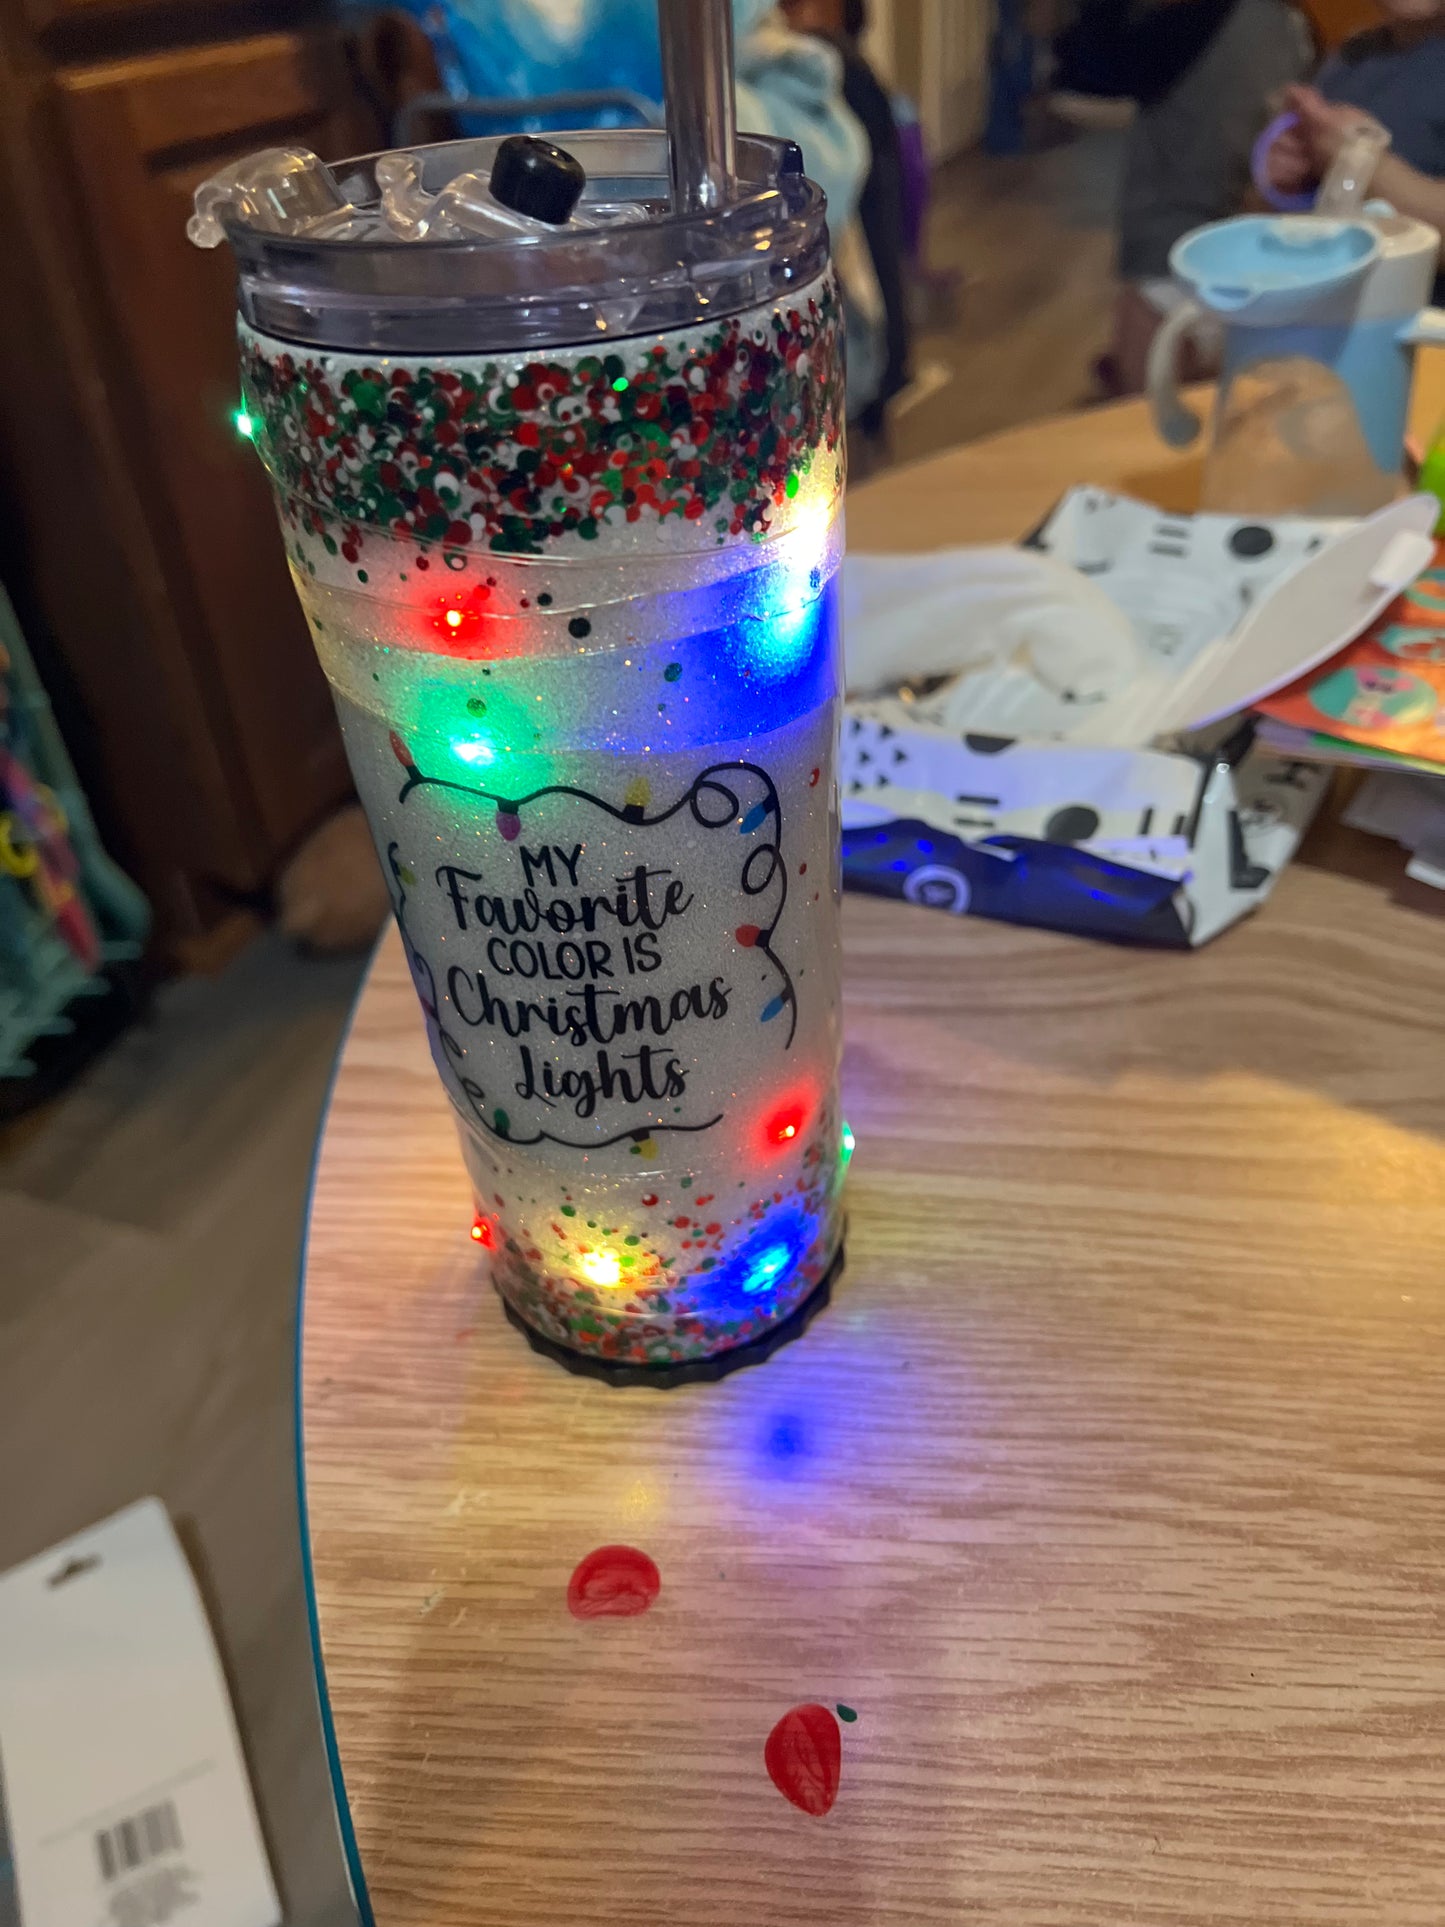 My favorite color is Christmas lights tumbler